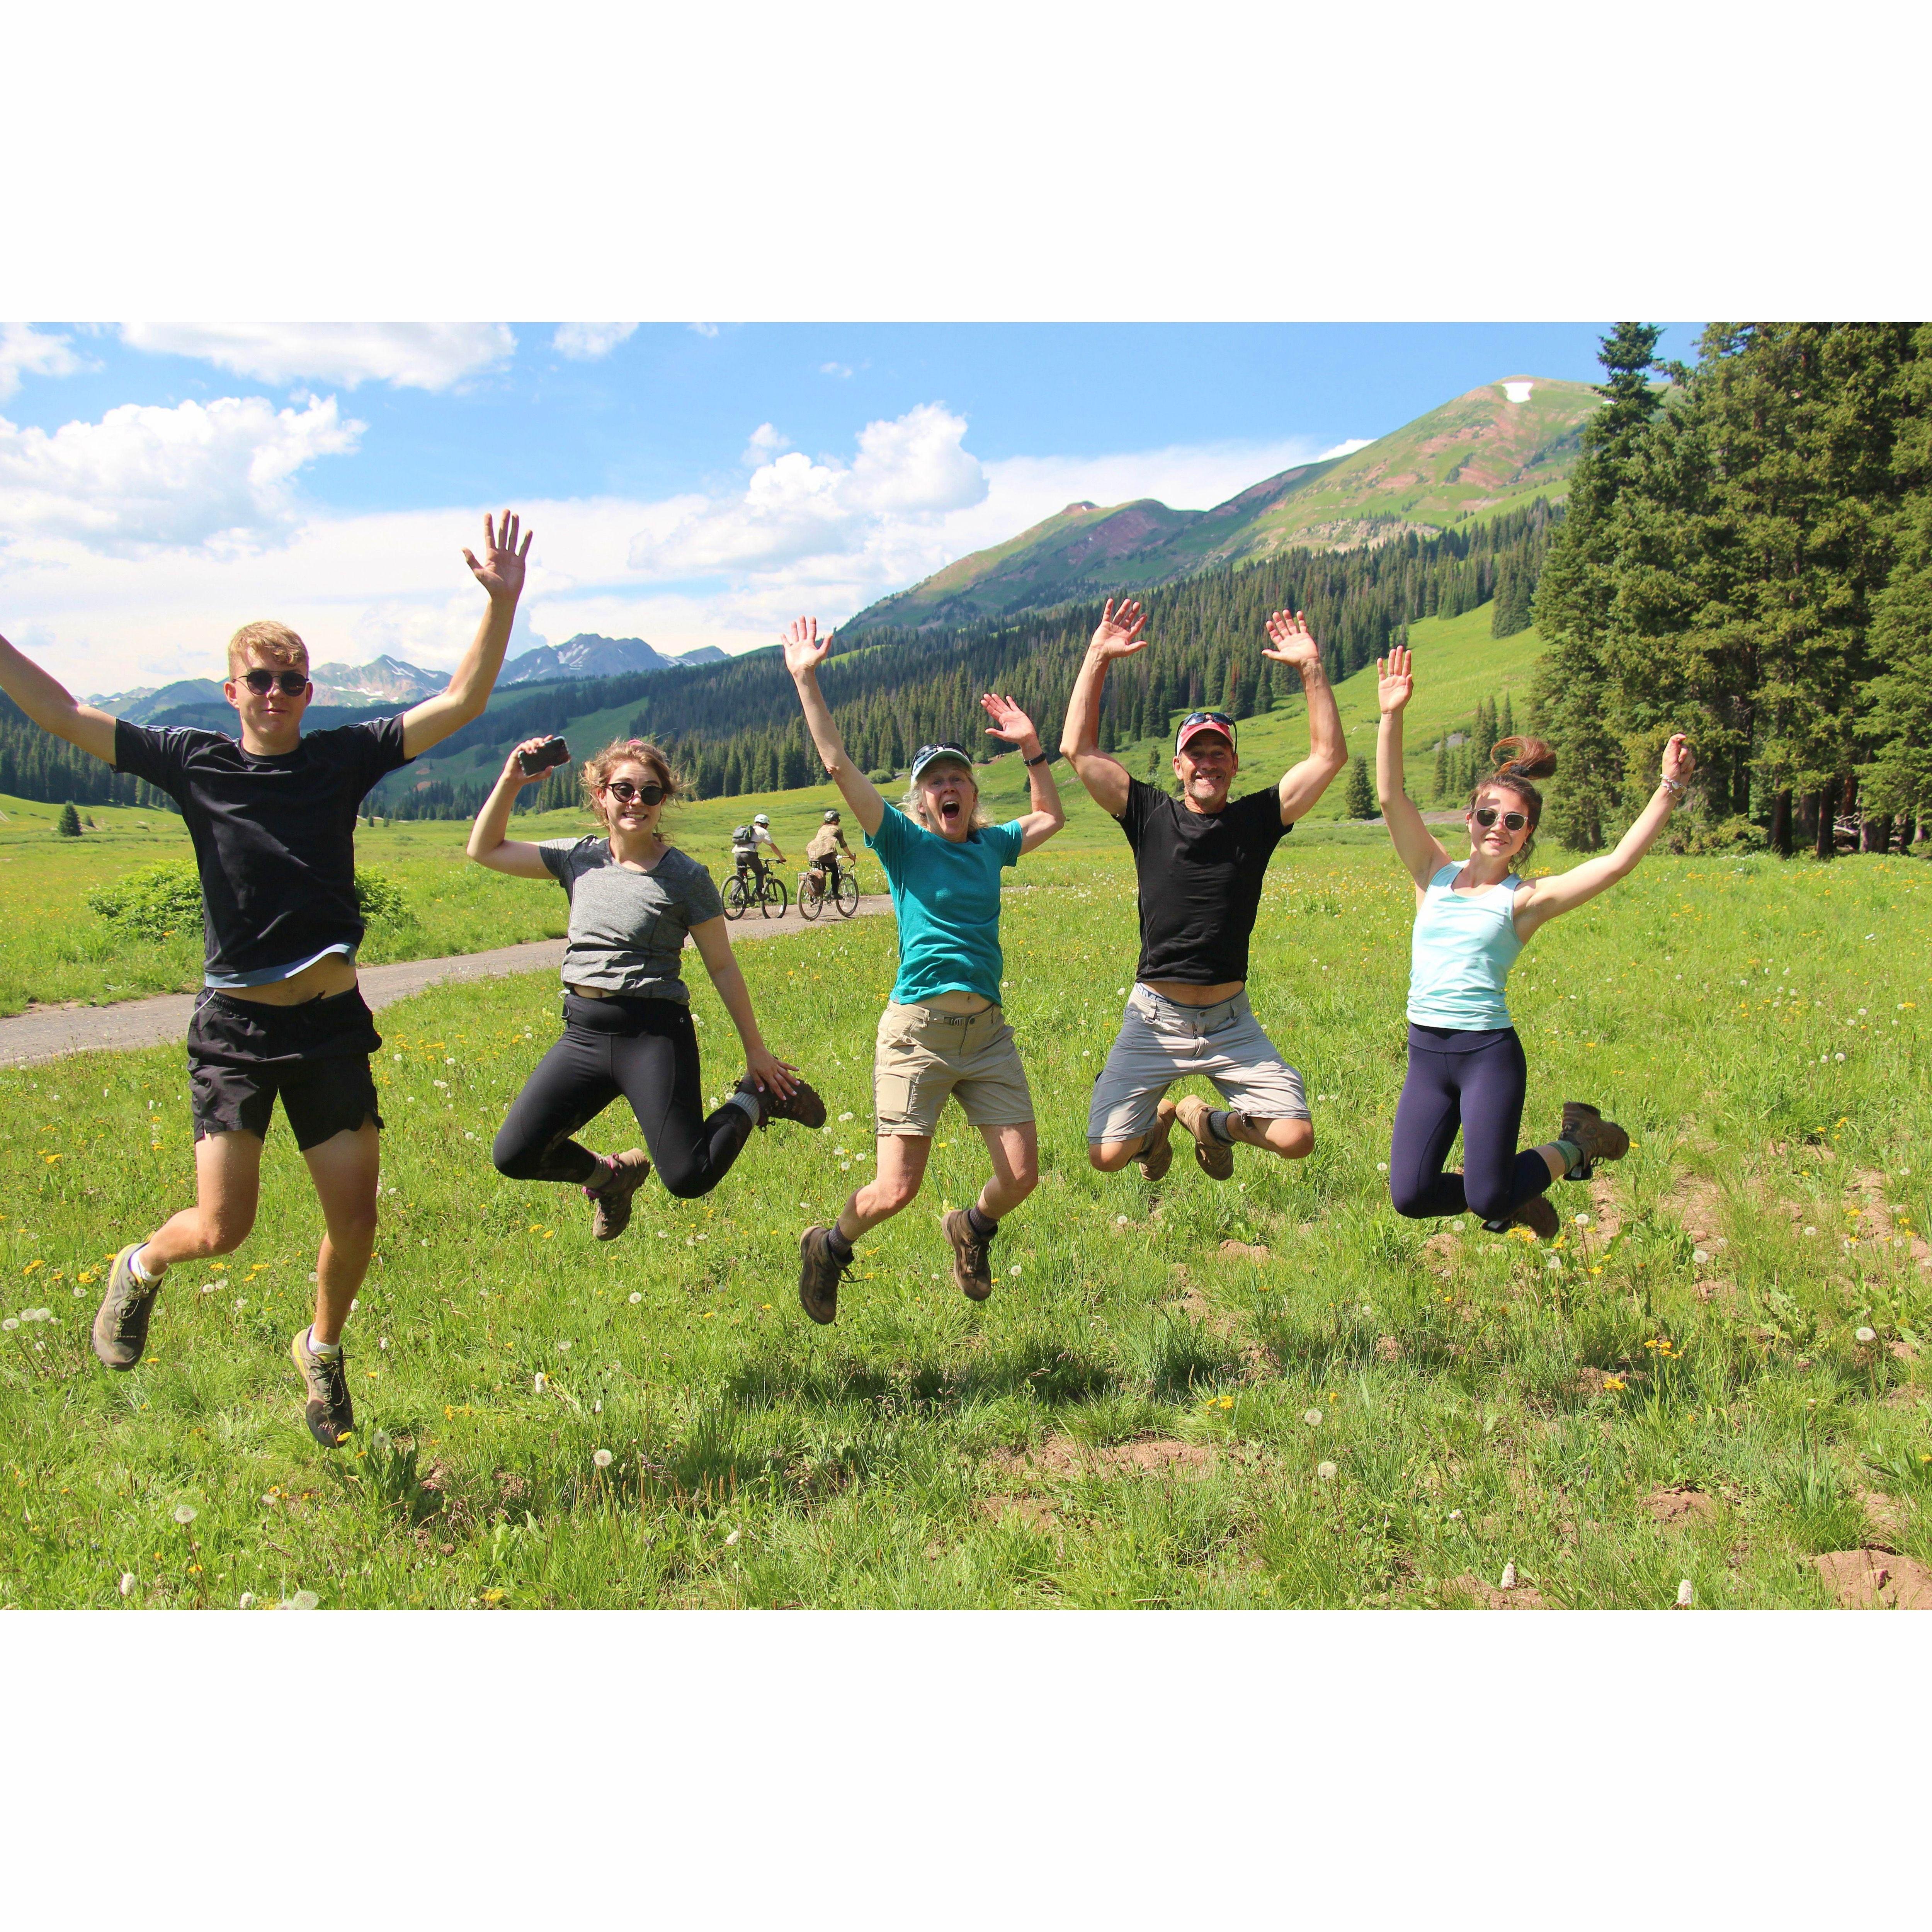 Jumping for joy after finishing the Maroon Bells hike - Aspen to Crested Butte, CO